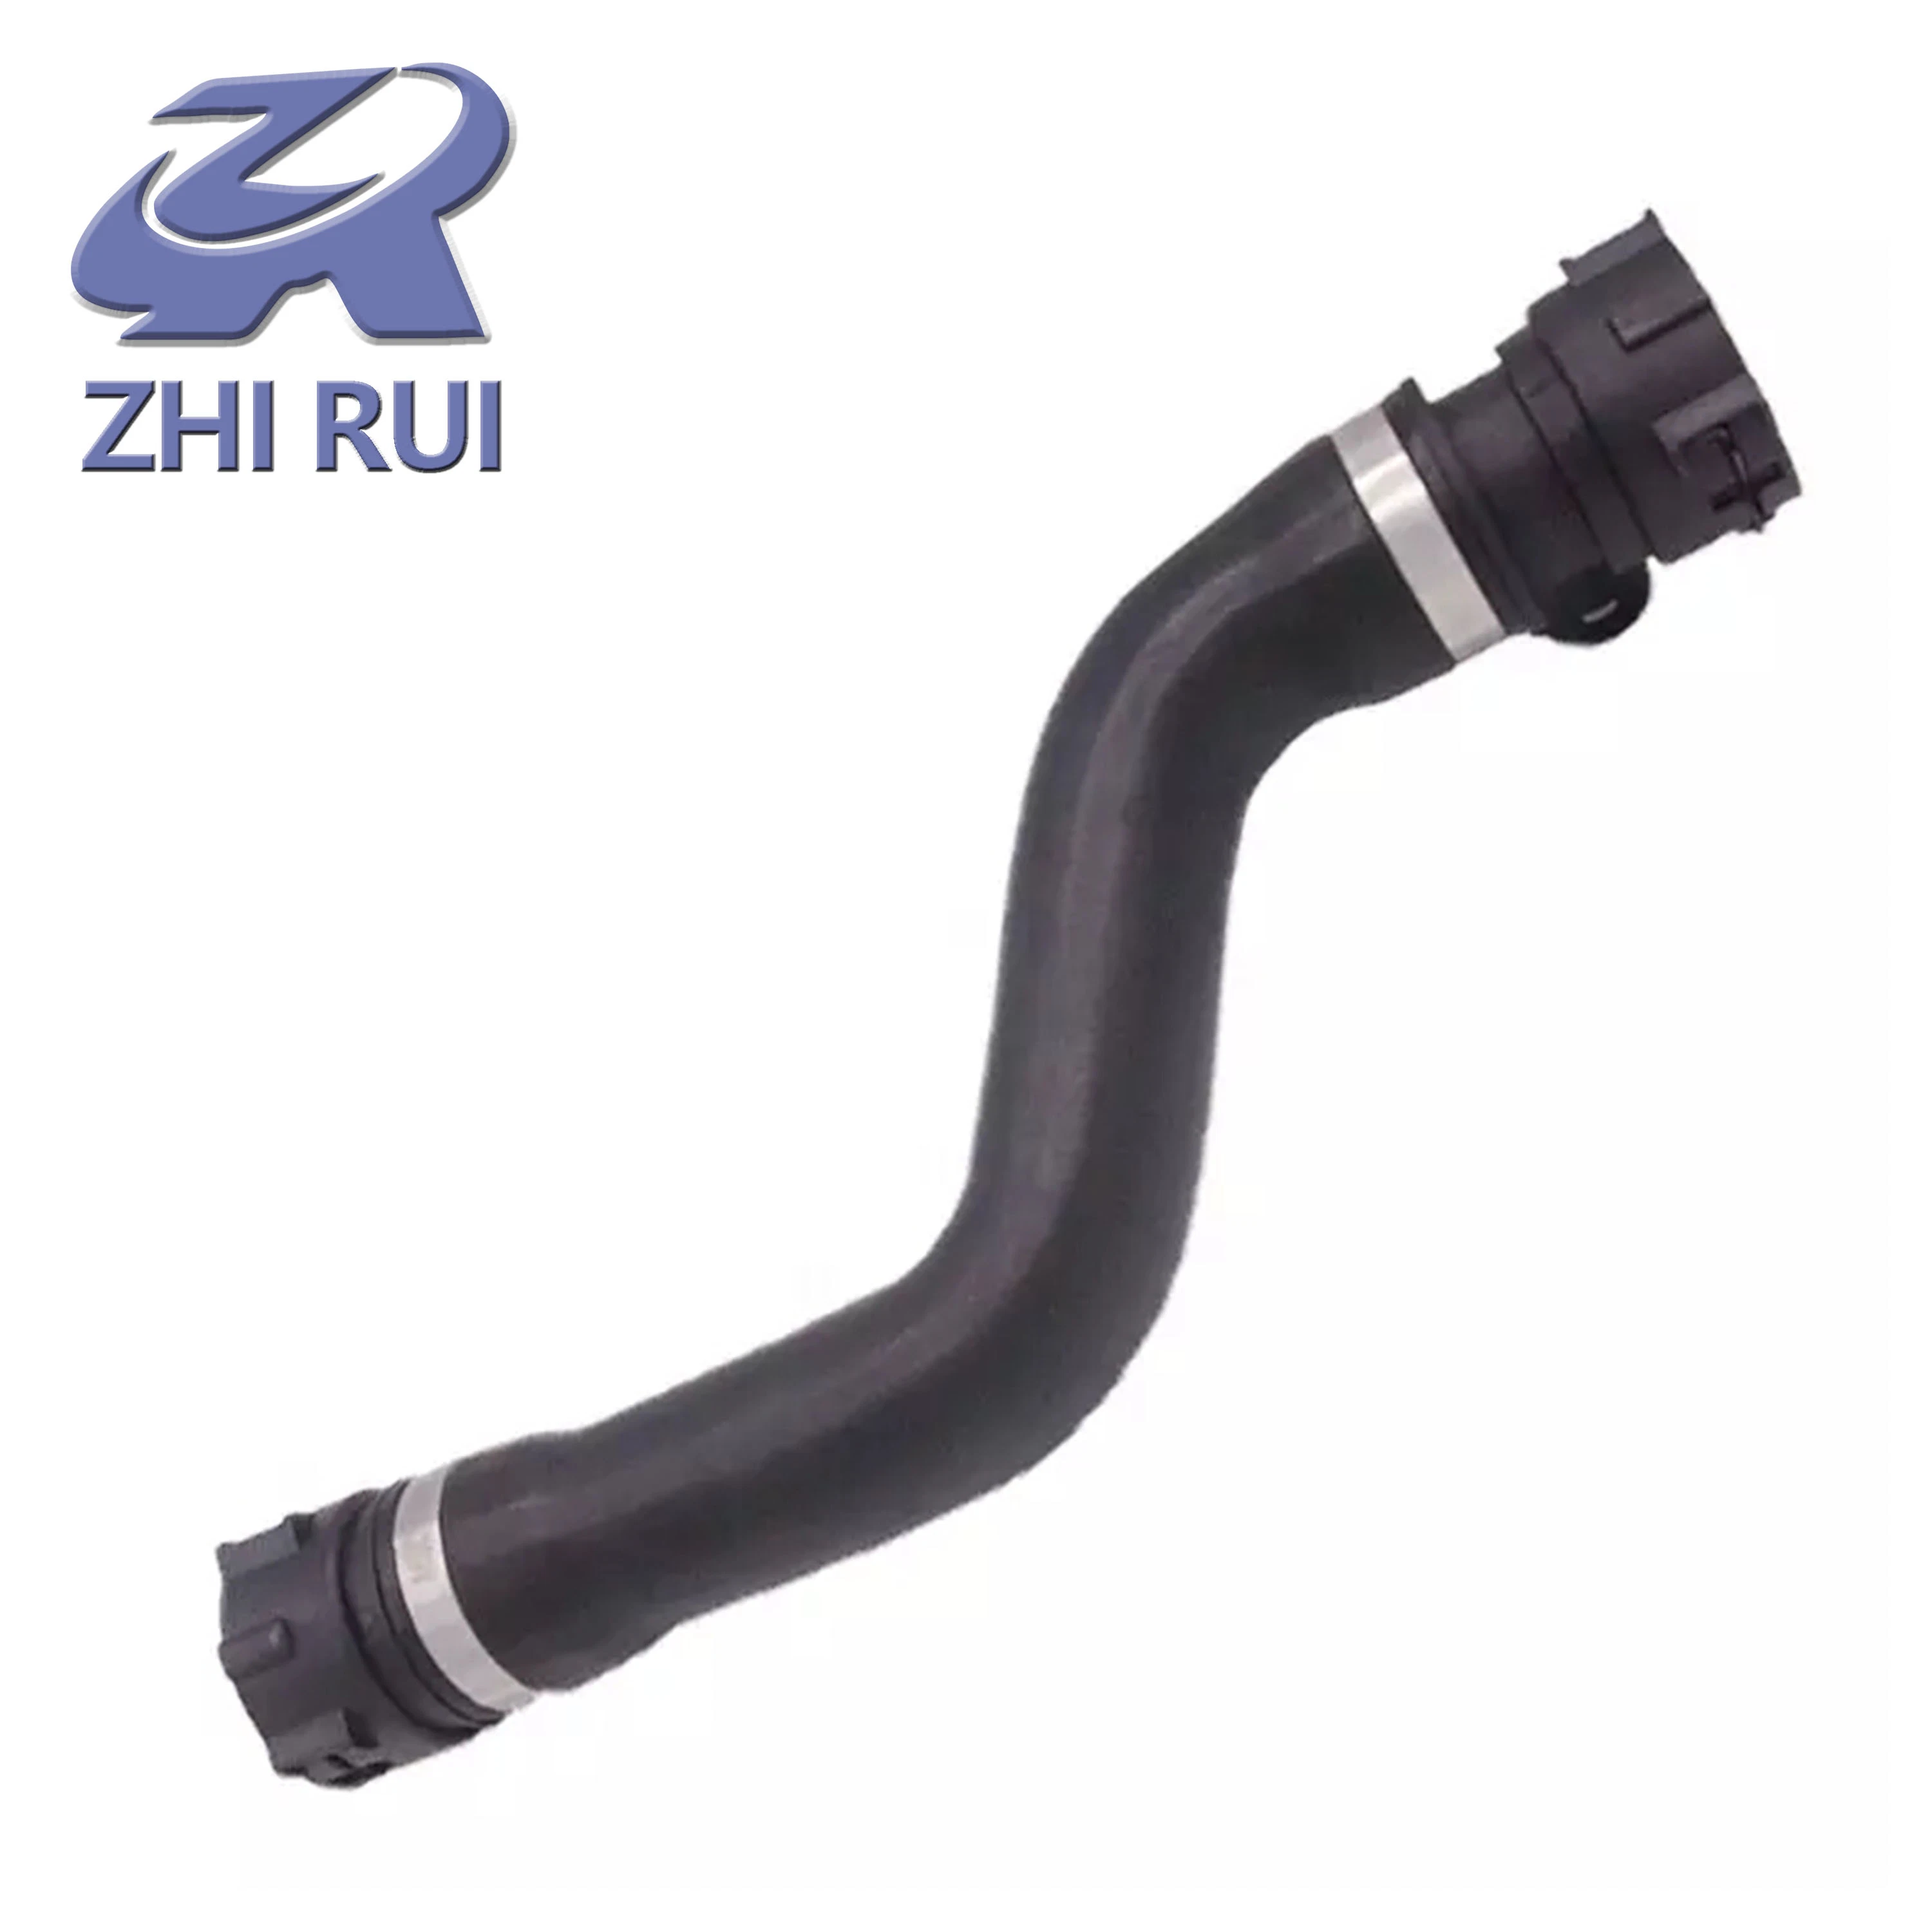 1712 7568 751 Wholesale Auto Parts Engine Coolant Radiator Hose Water Pipe for BMW E60 OEM 17127568751